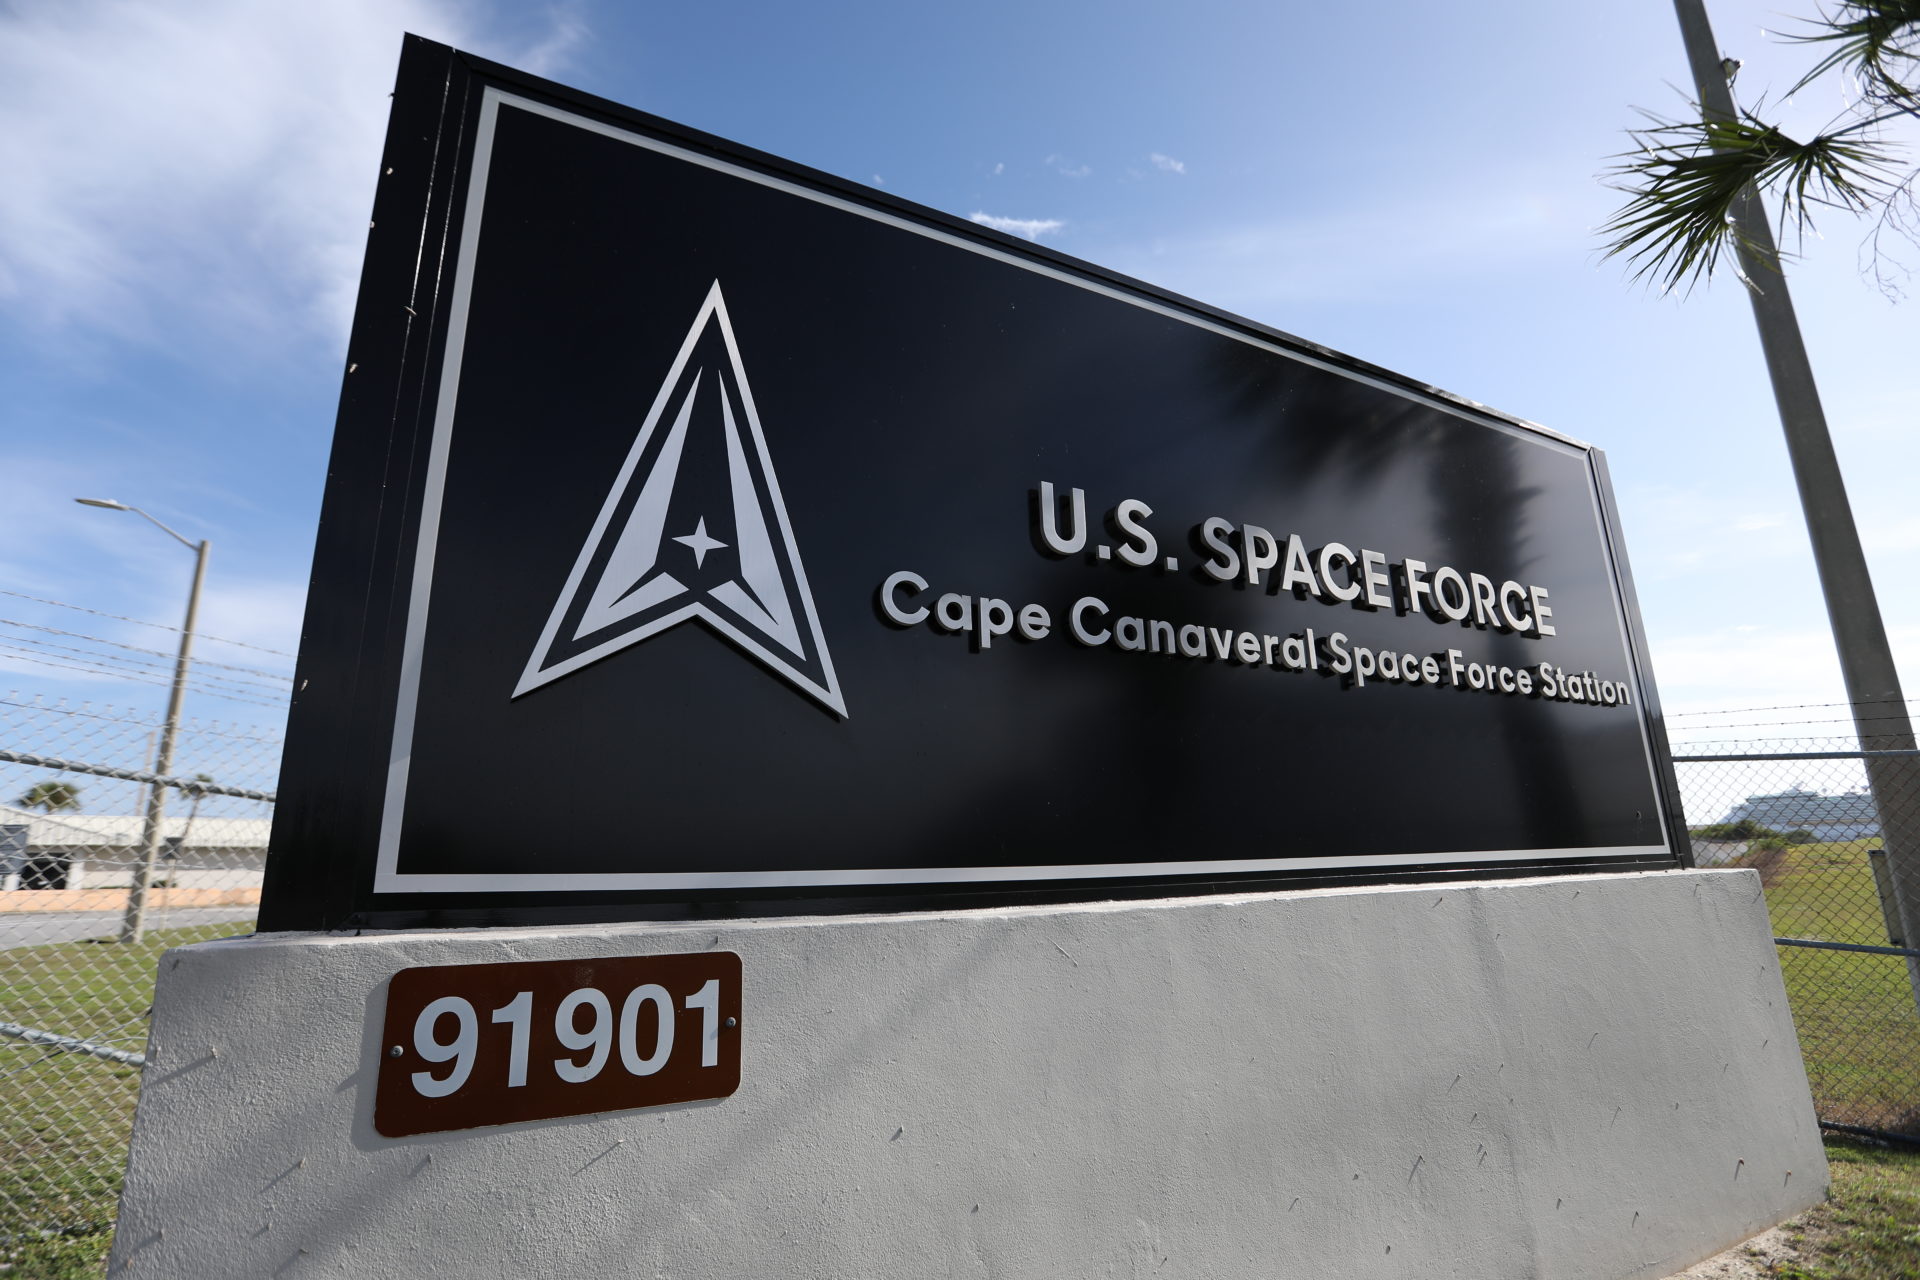 SpaceX and U.S. Space Force compound in Florida